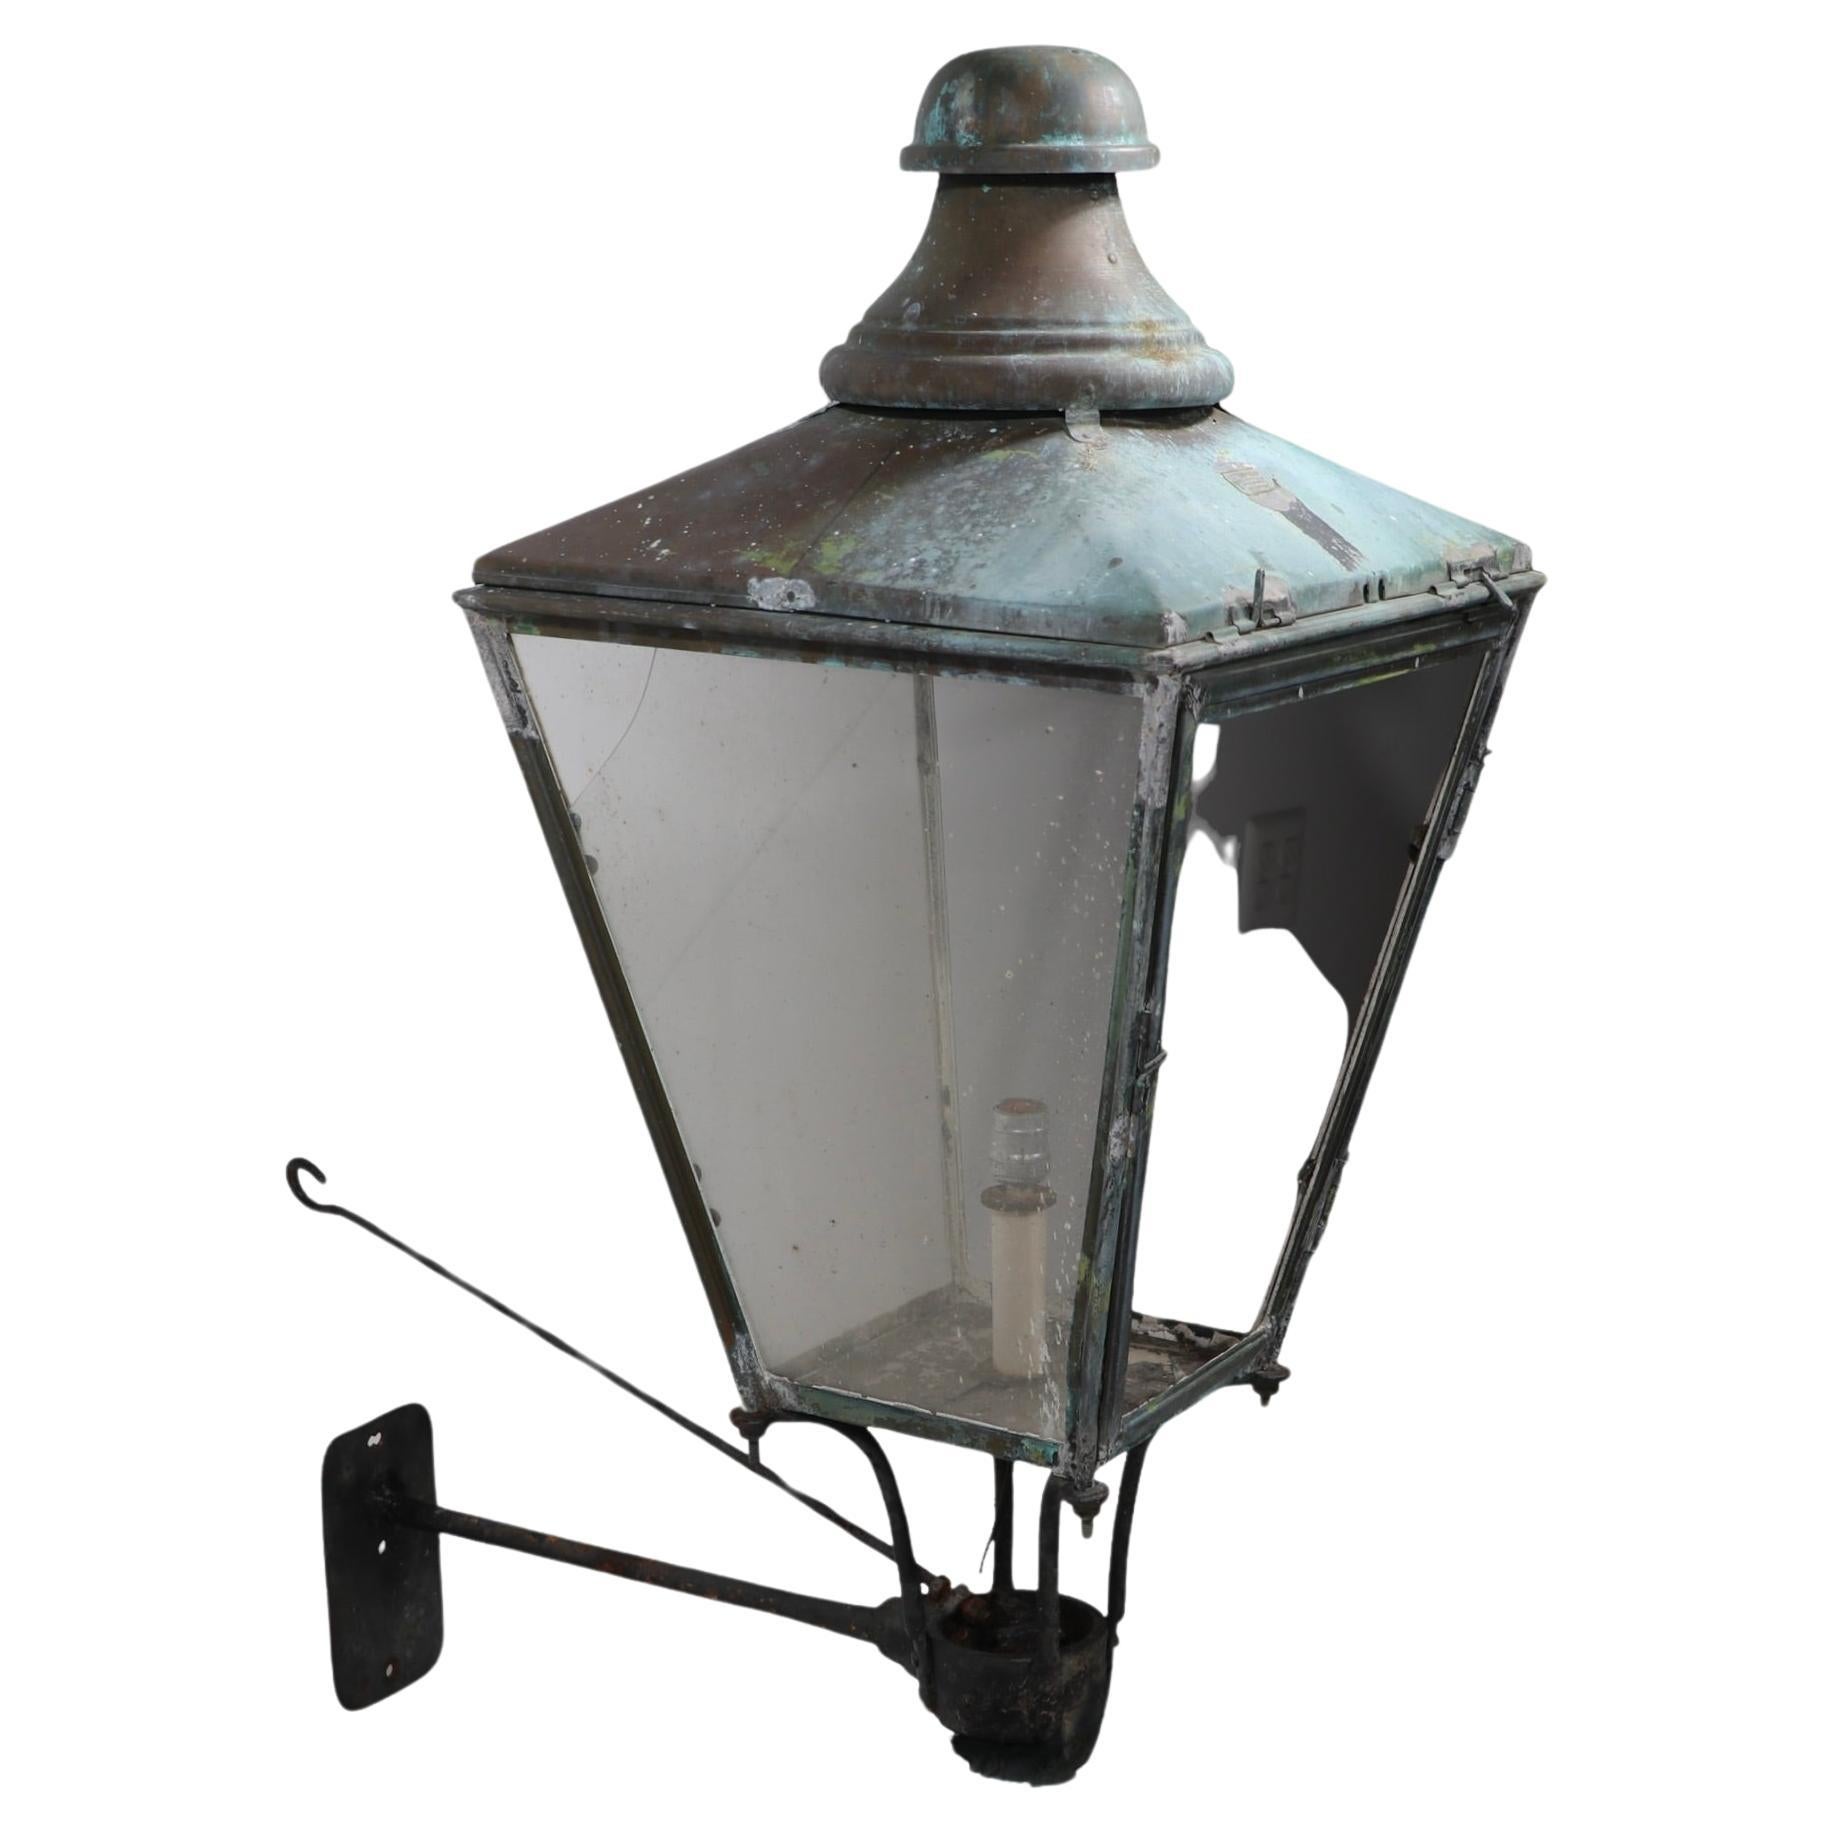 Rare English copper lantern sconce by noted maker, Foster & Pullen. The lantern has hinged top, and hinged panel door to allow access to the bulb from either the  top or the  front. The lid retains the makers tag which reads Foster & Pullen Limited